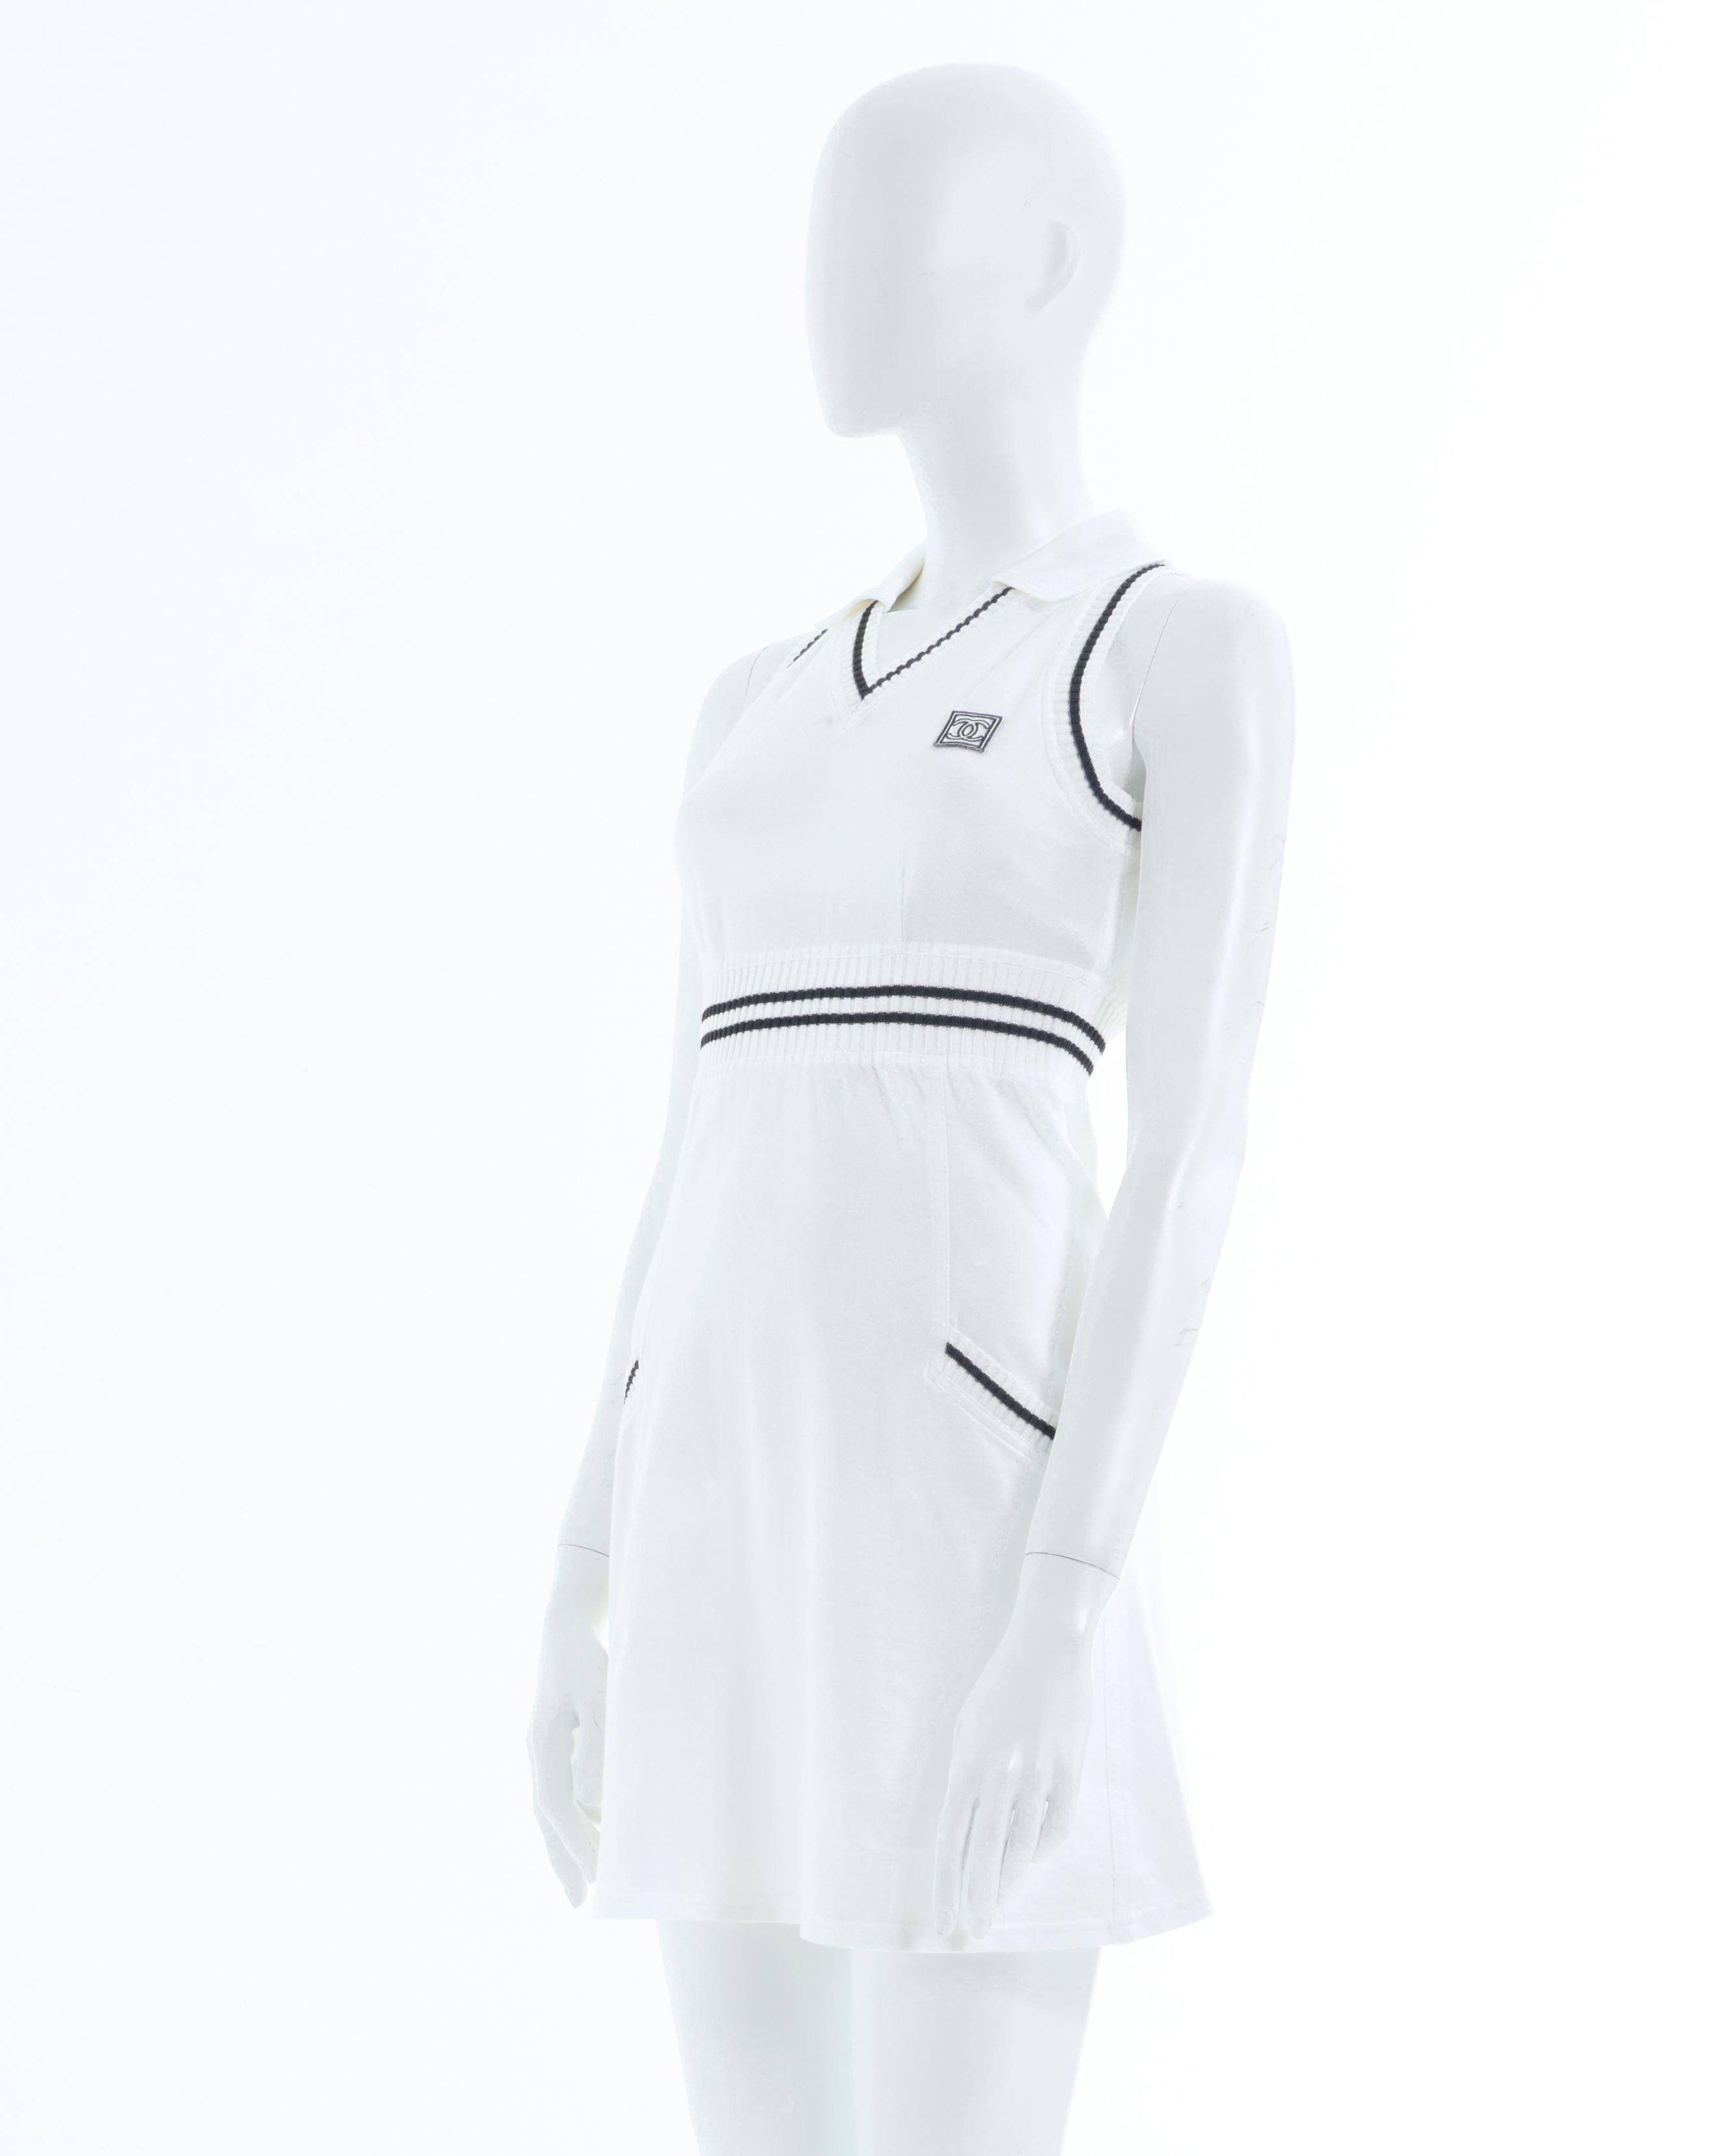 Chanel by Karl Lagerfeld F/W 2003 White cotton sleeveless tennis mini dress In Excellent Condition For Sale In Milano, IT